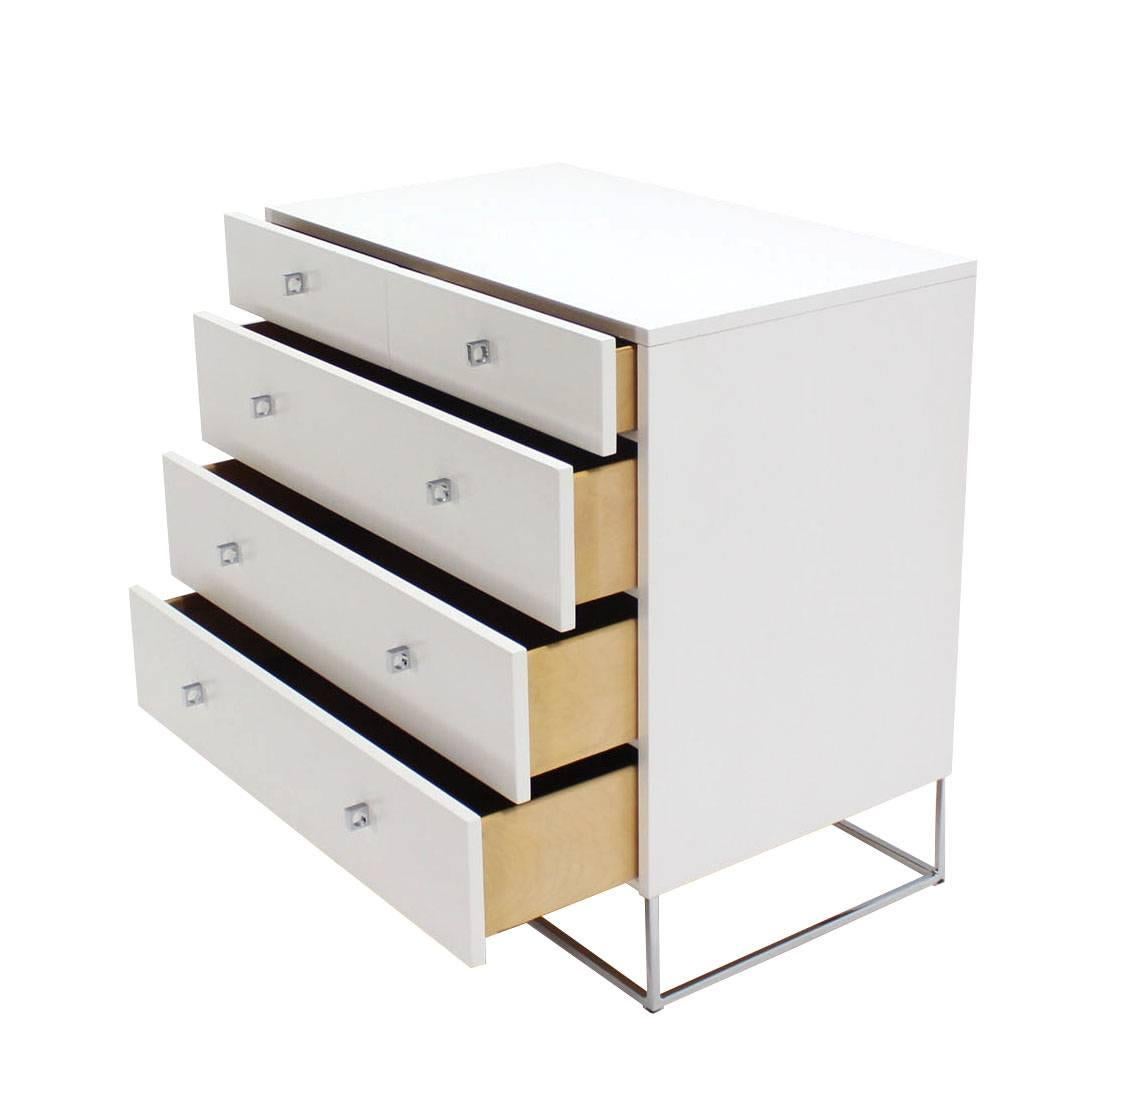 Pair of Mid-Century Modern white lacquered bachelor chests dressers on chrome bases.